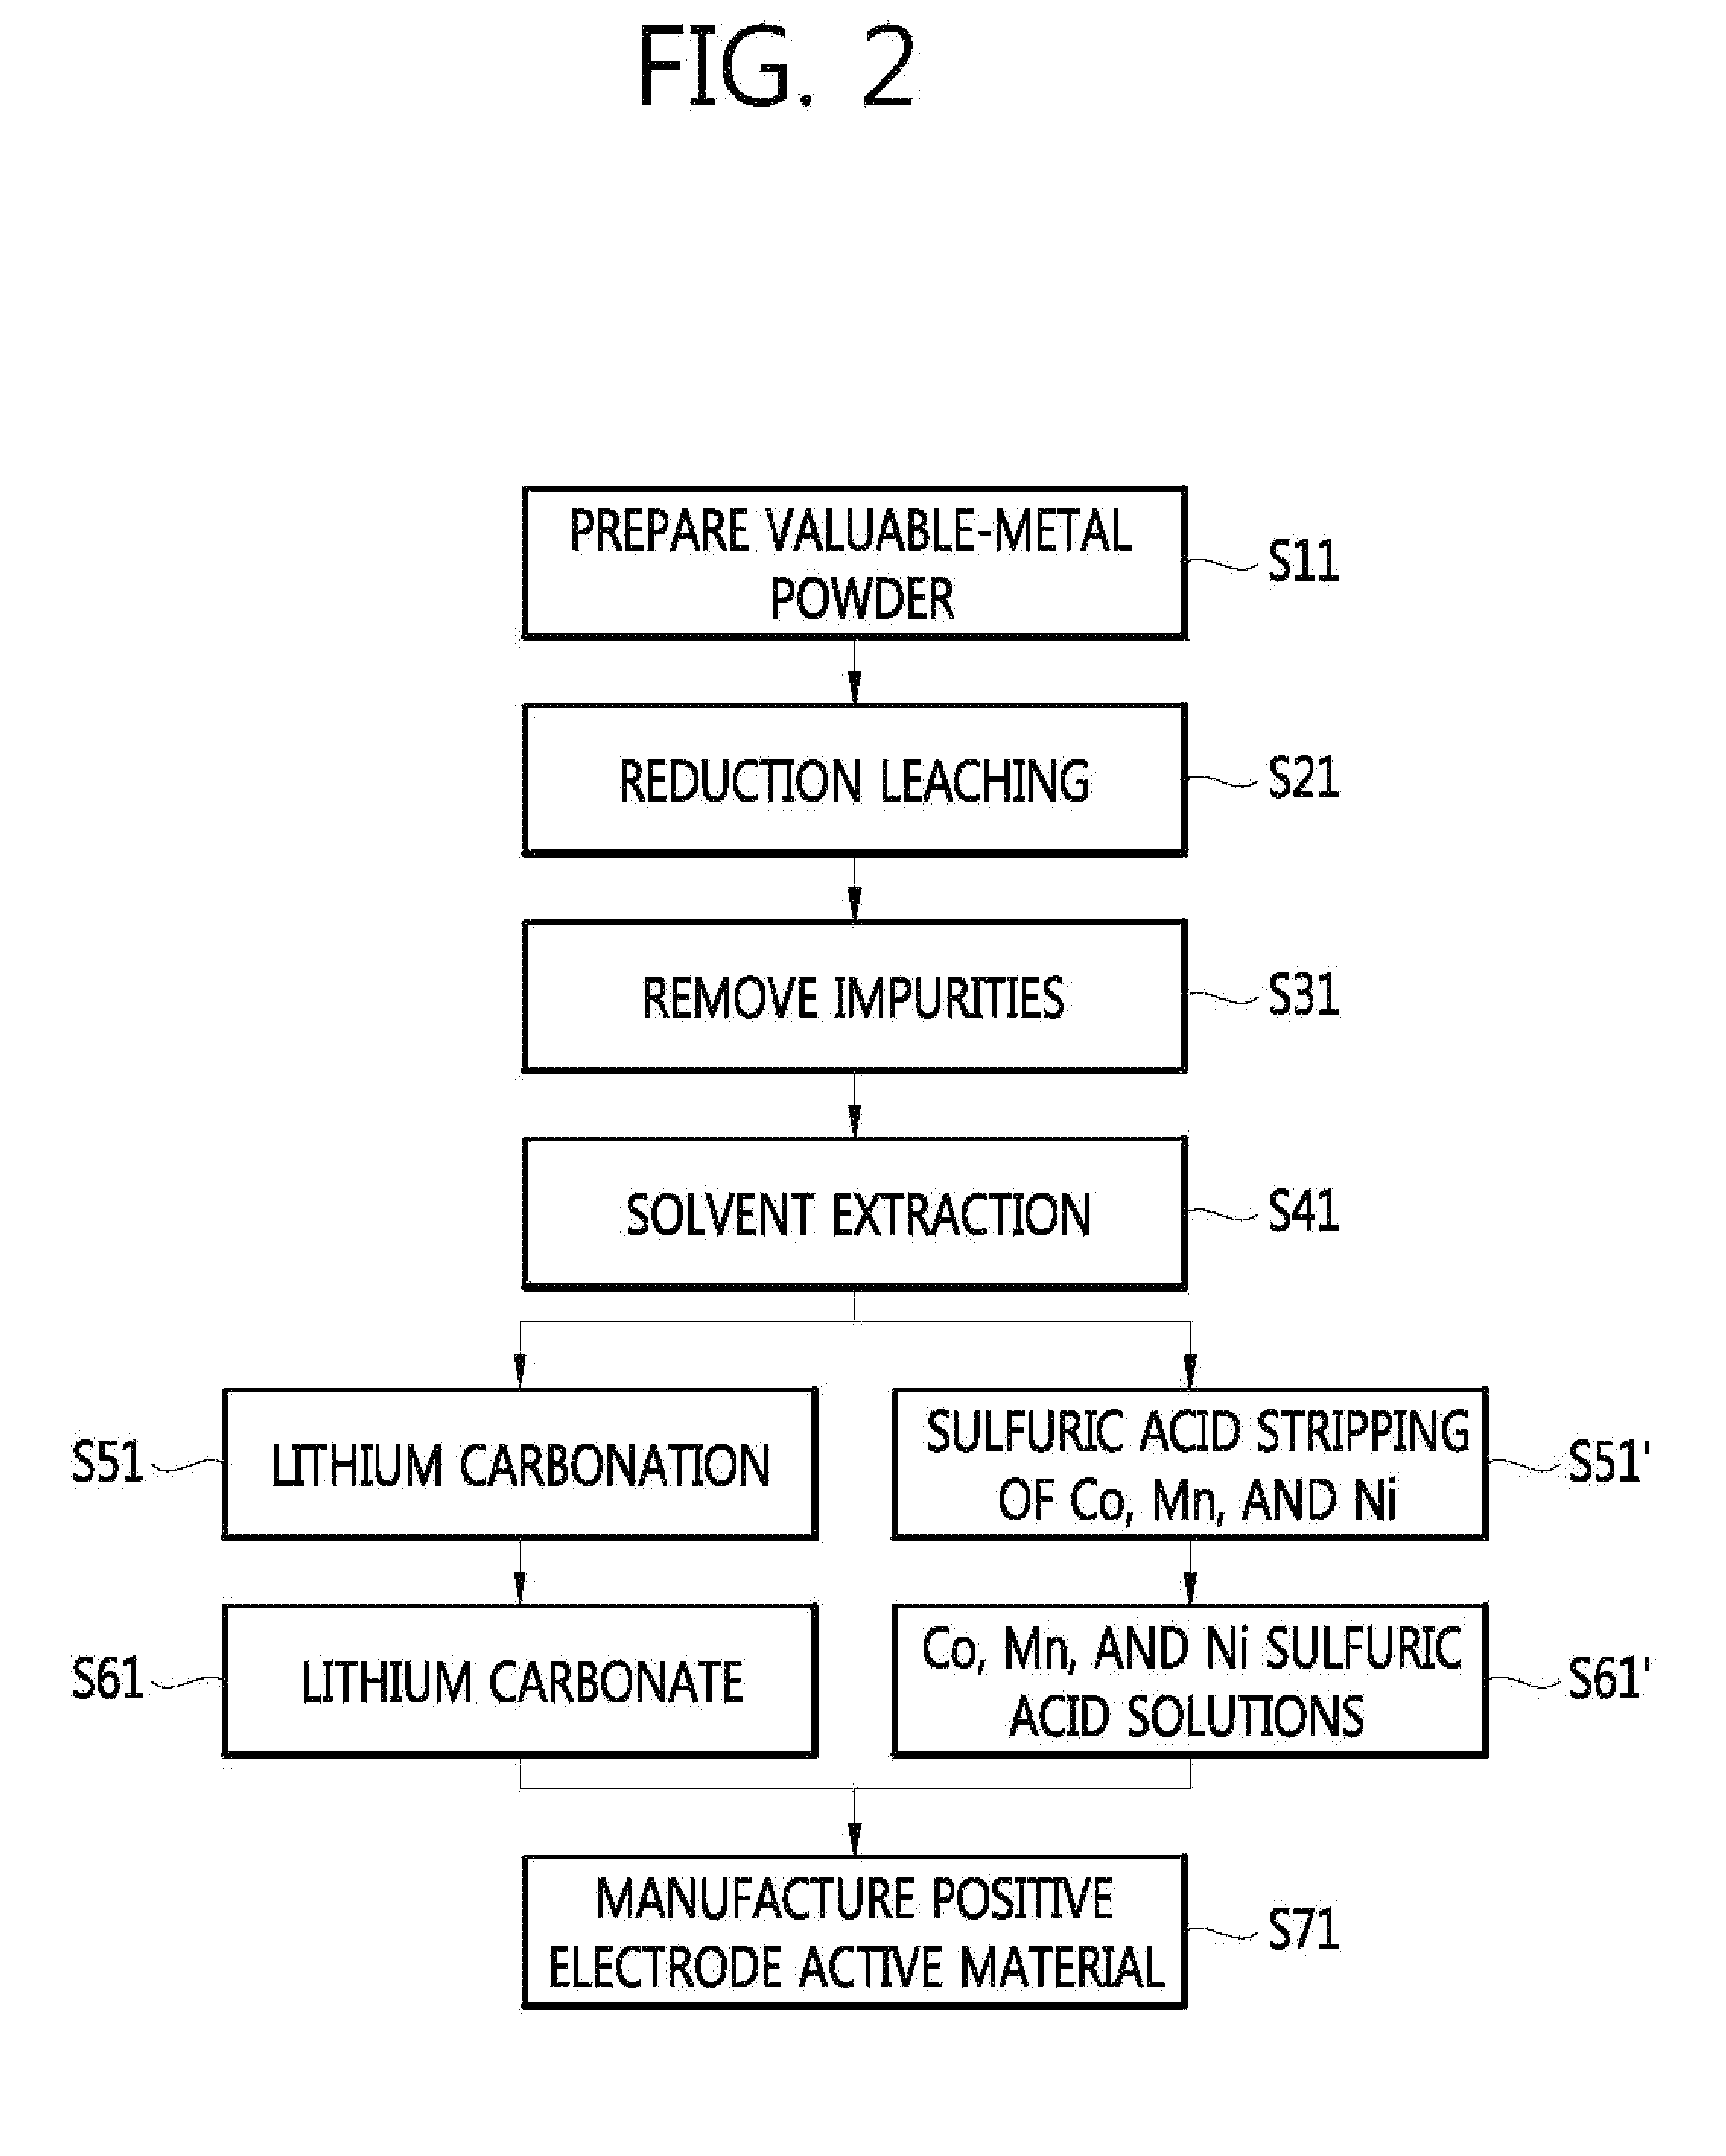 Method for manufacturing a valuable-metal sulfuric-acid solution from a waste battery, and method for manufacturing a positive electrode active material